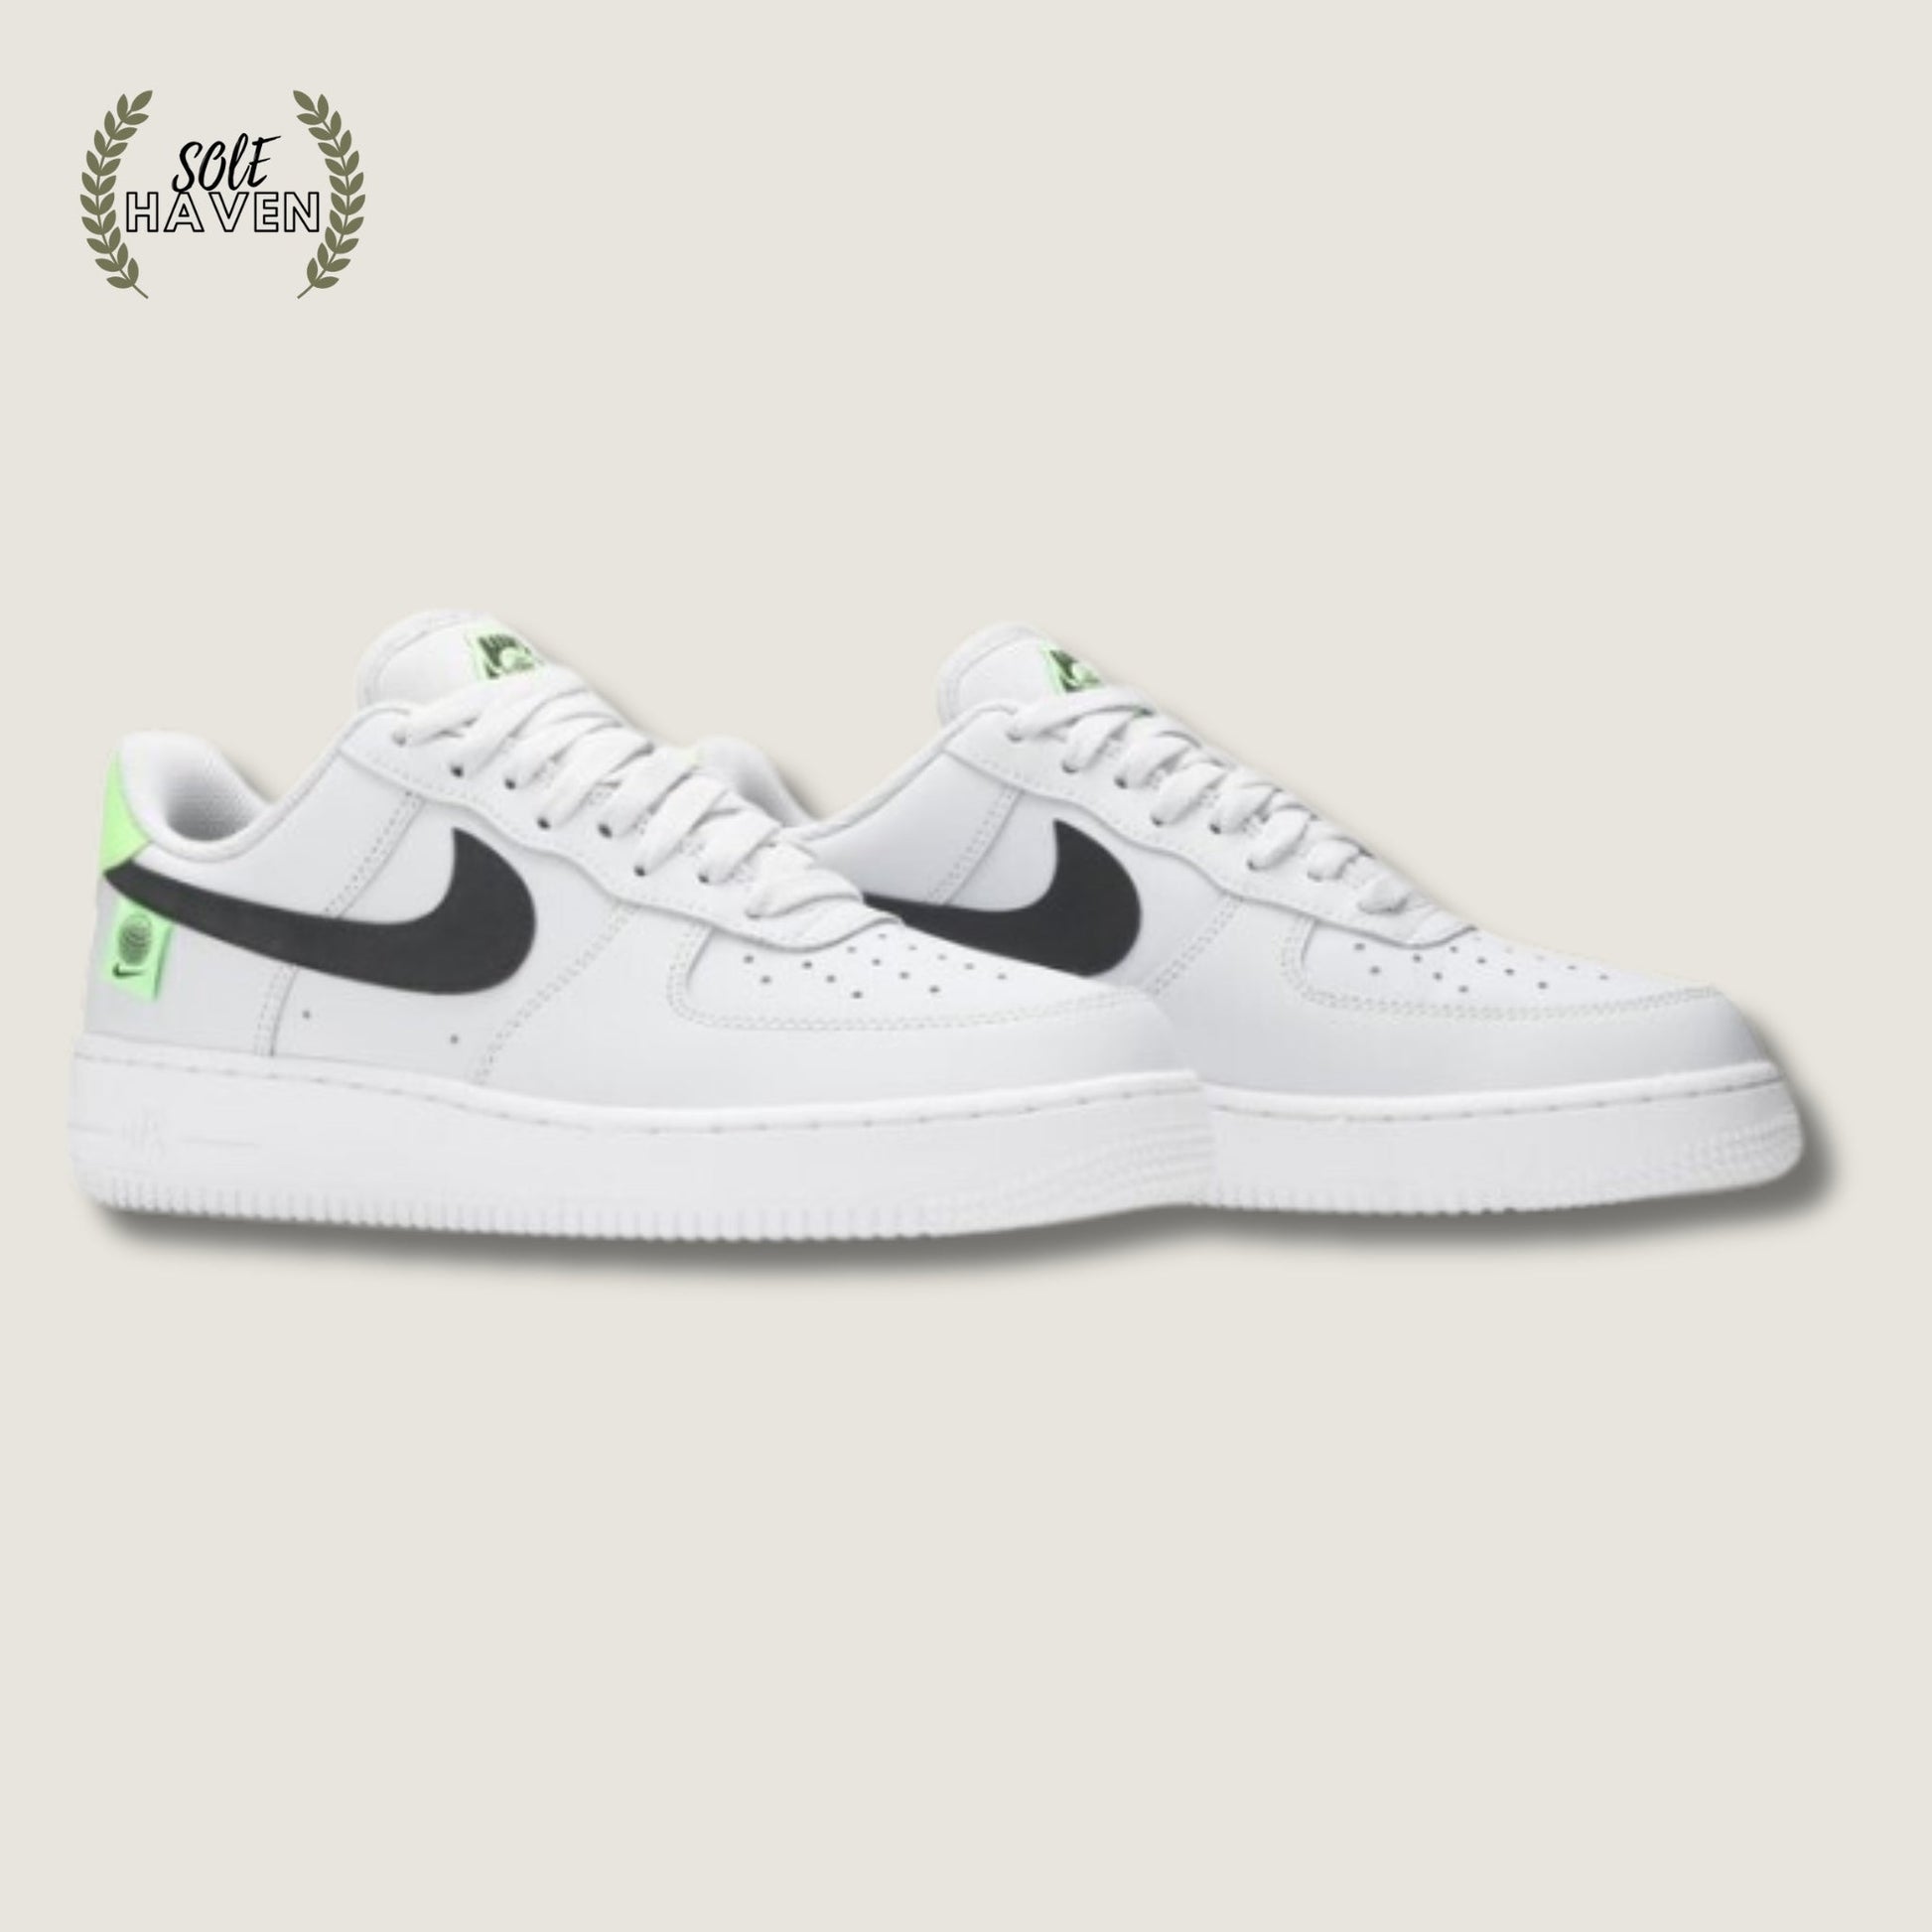 Air Force 1 '07 Low 'Worldwide Pack - Platinum Green Strike' - Sole HavenShoesNike